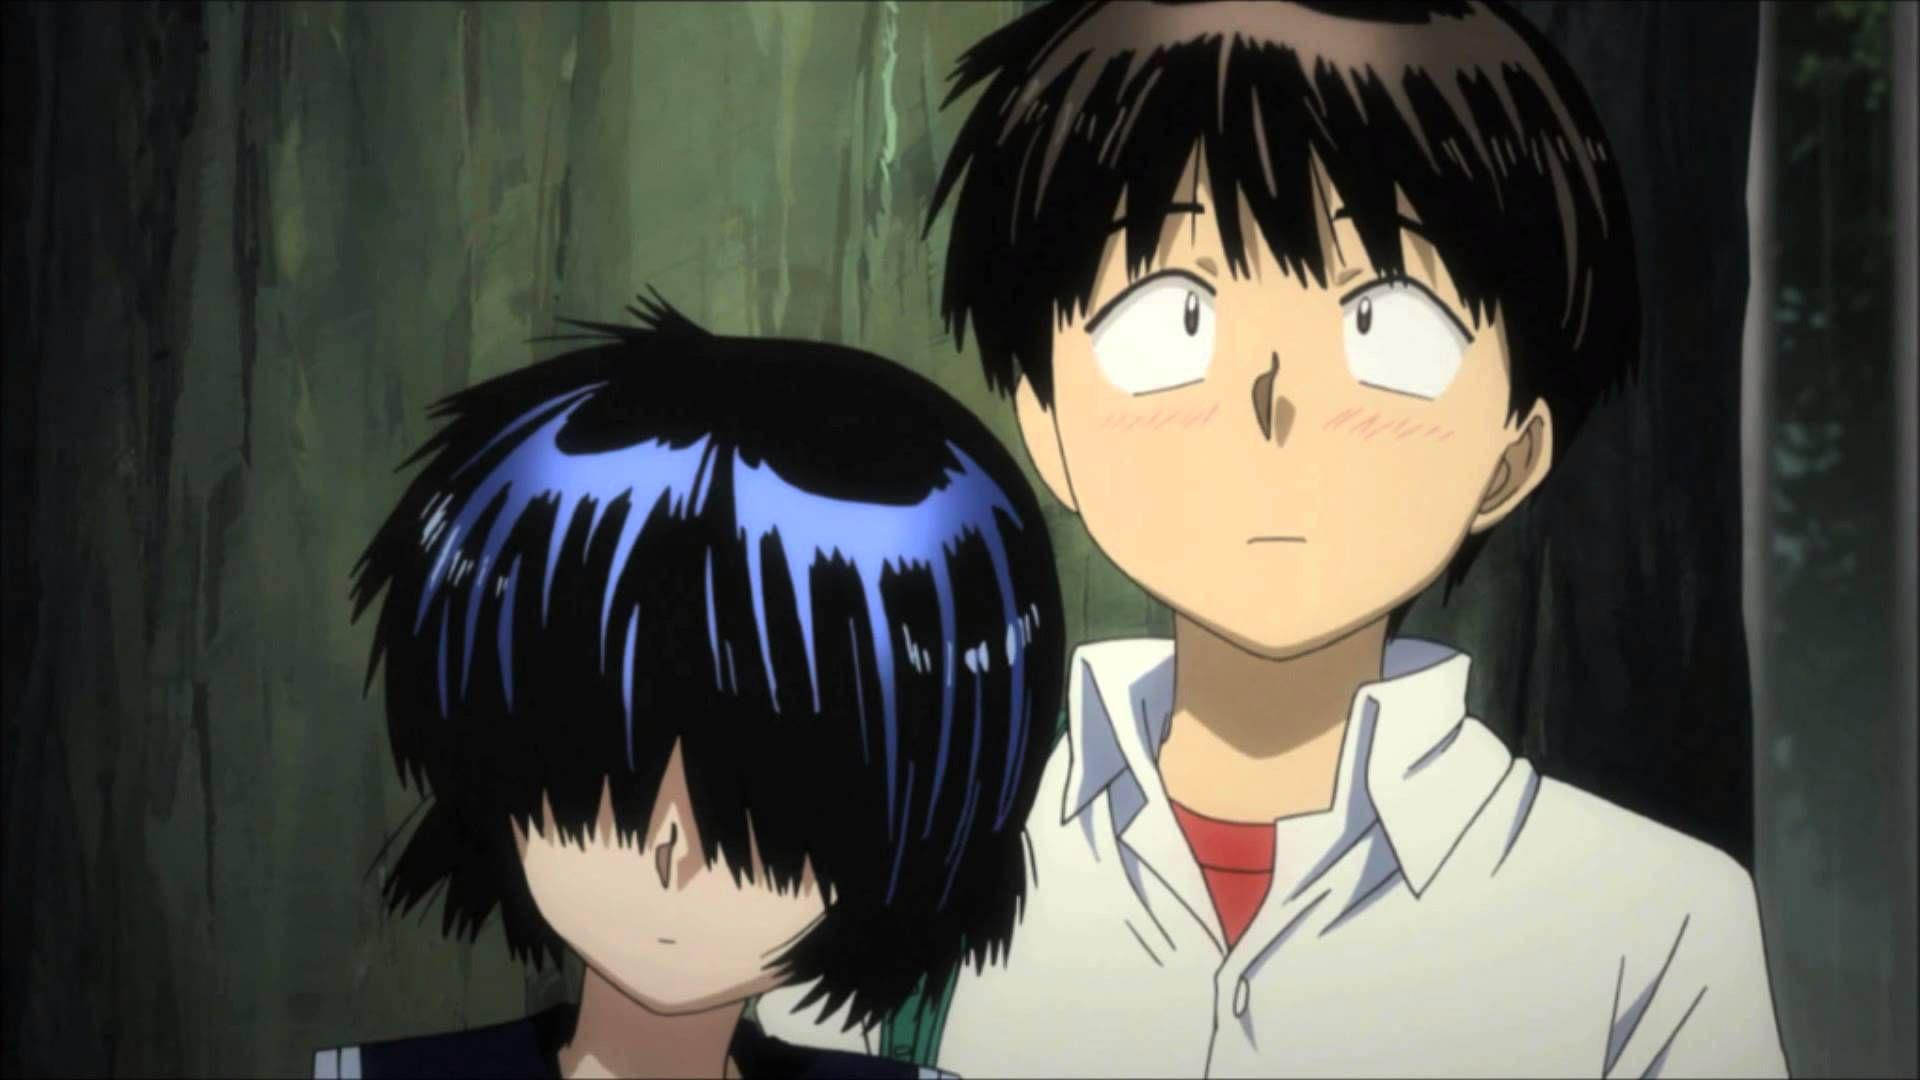 mysterious girlfriend x hd wallpaper background image on mikoto urabe wallpapers